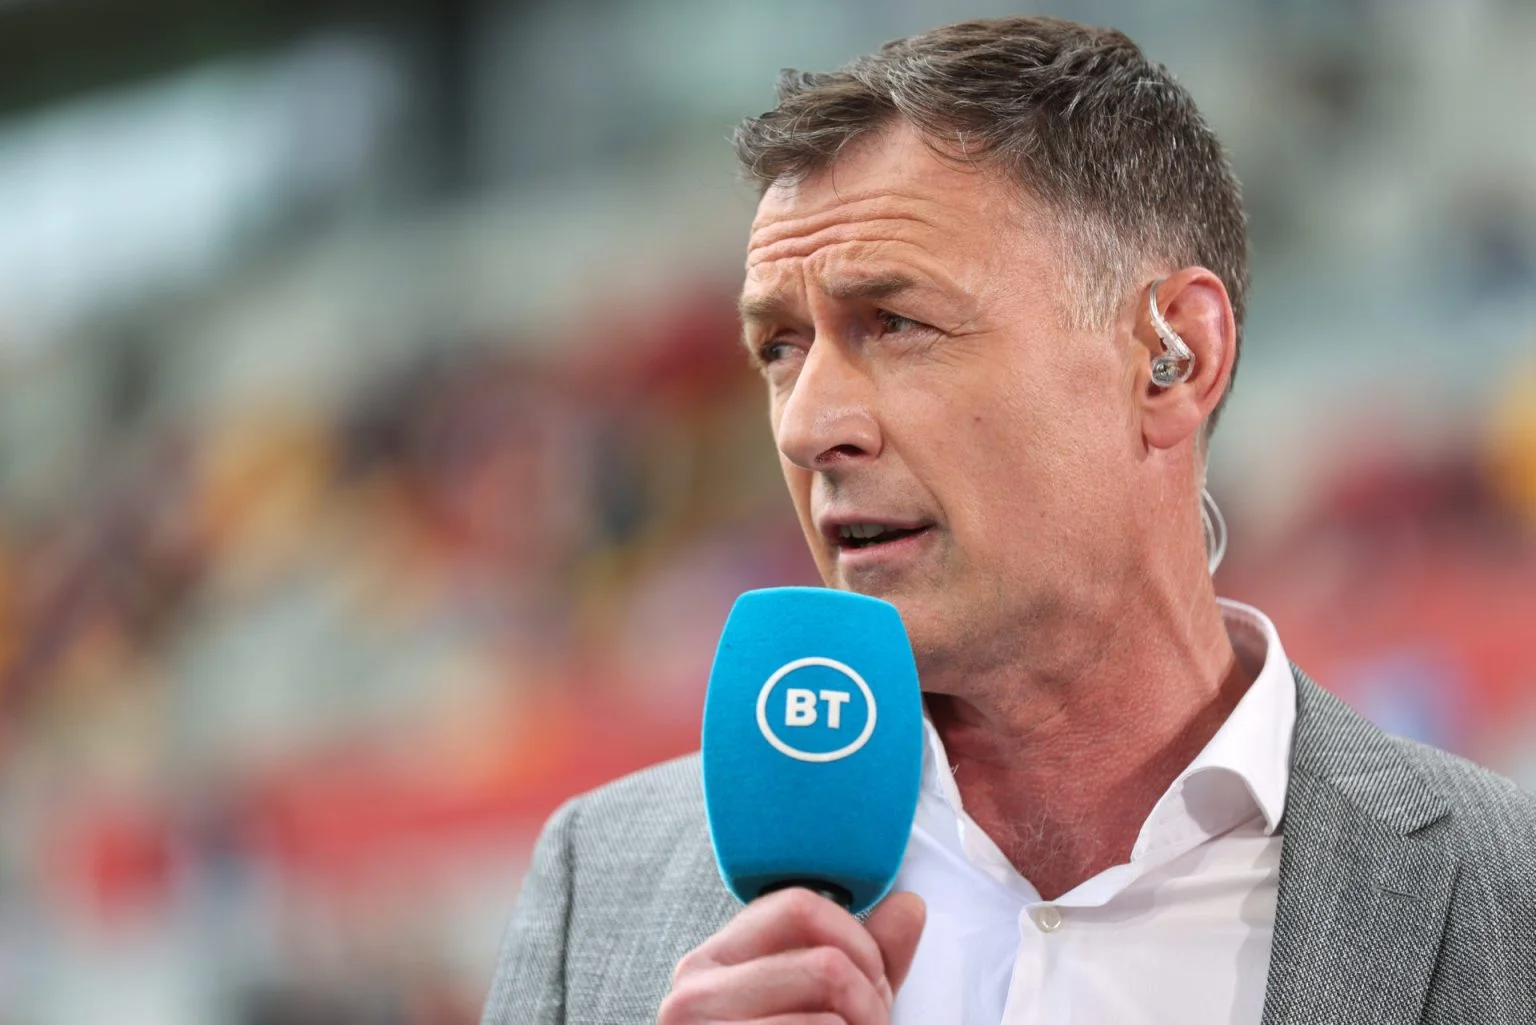 EPL: Chris Sutton predicts Man Utd vs Chelsea, Arsenal, Liverpool, others